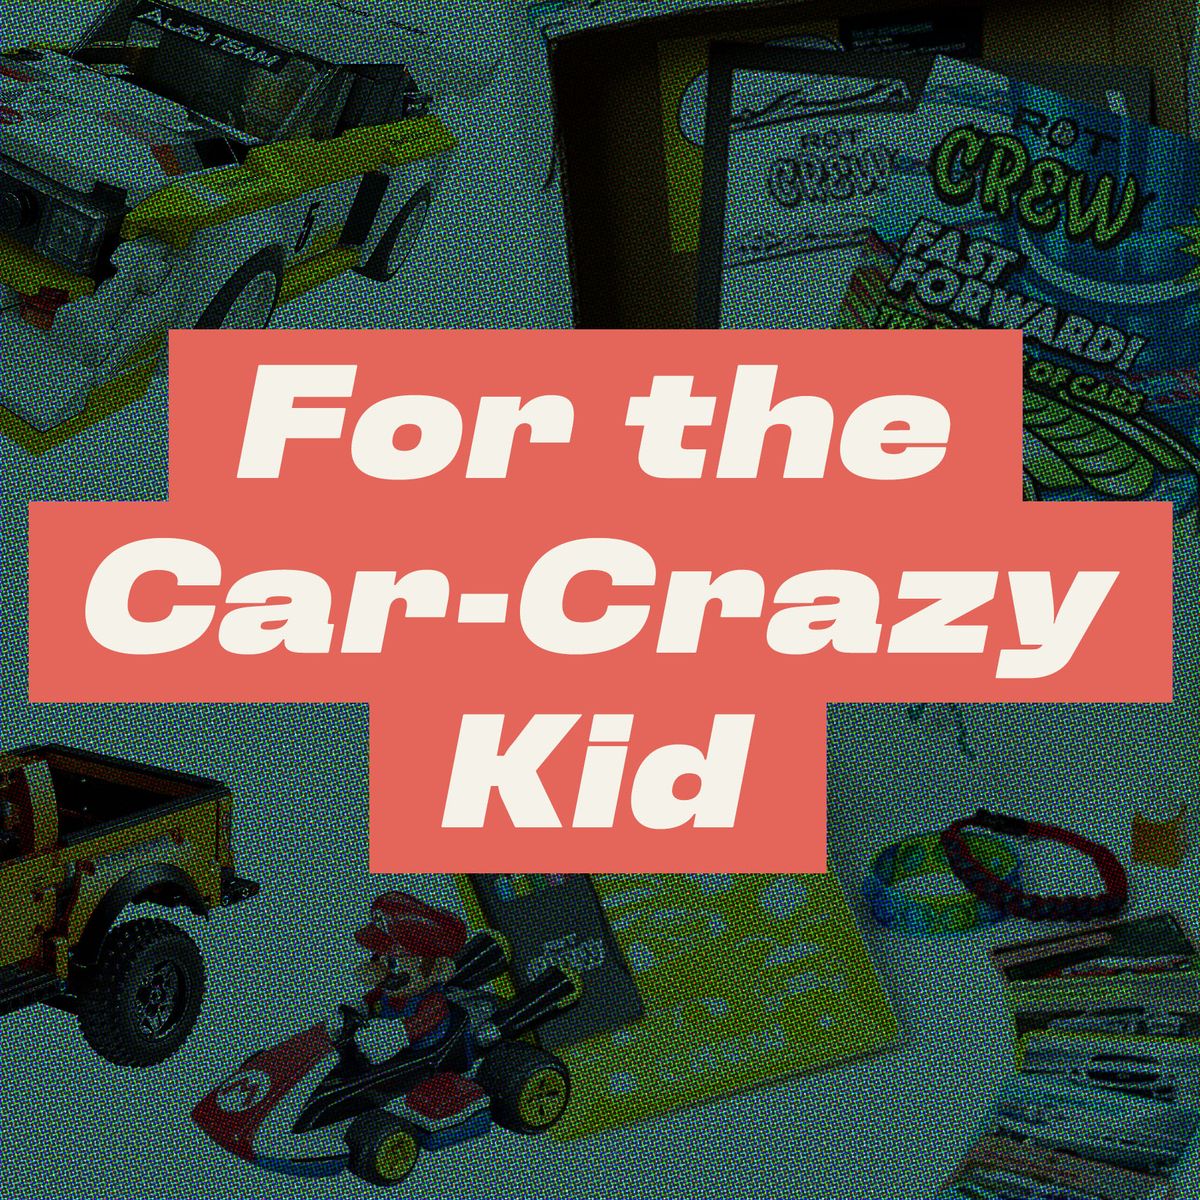 CarsGuide's 10 fantastic family gifts for car lovers